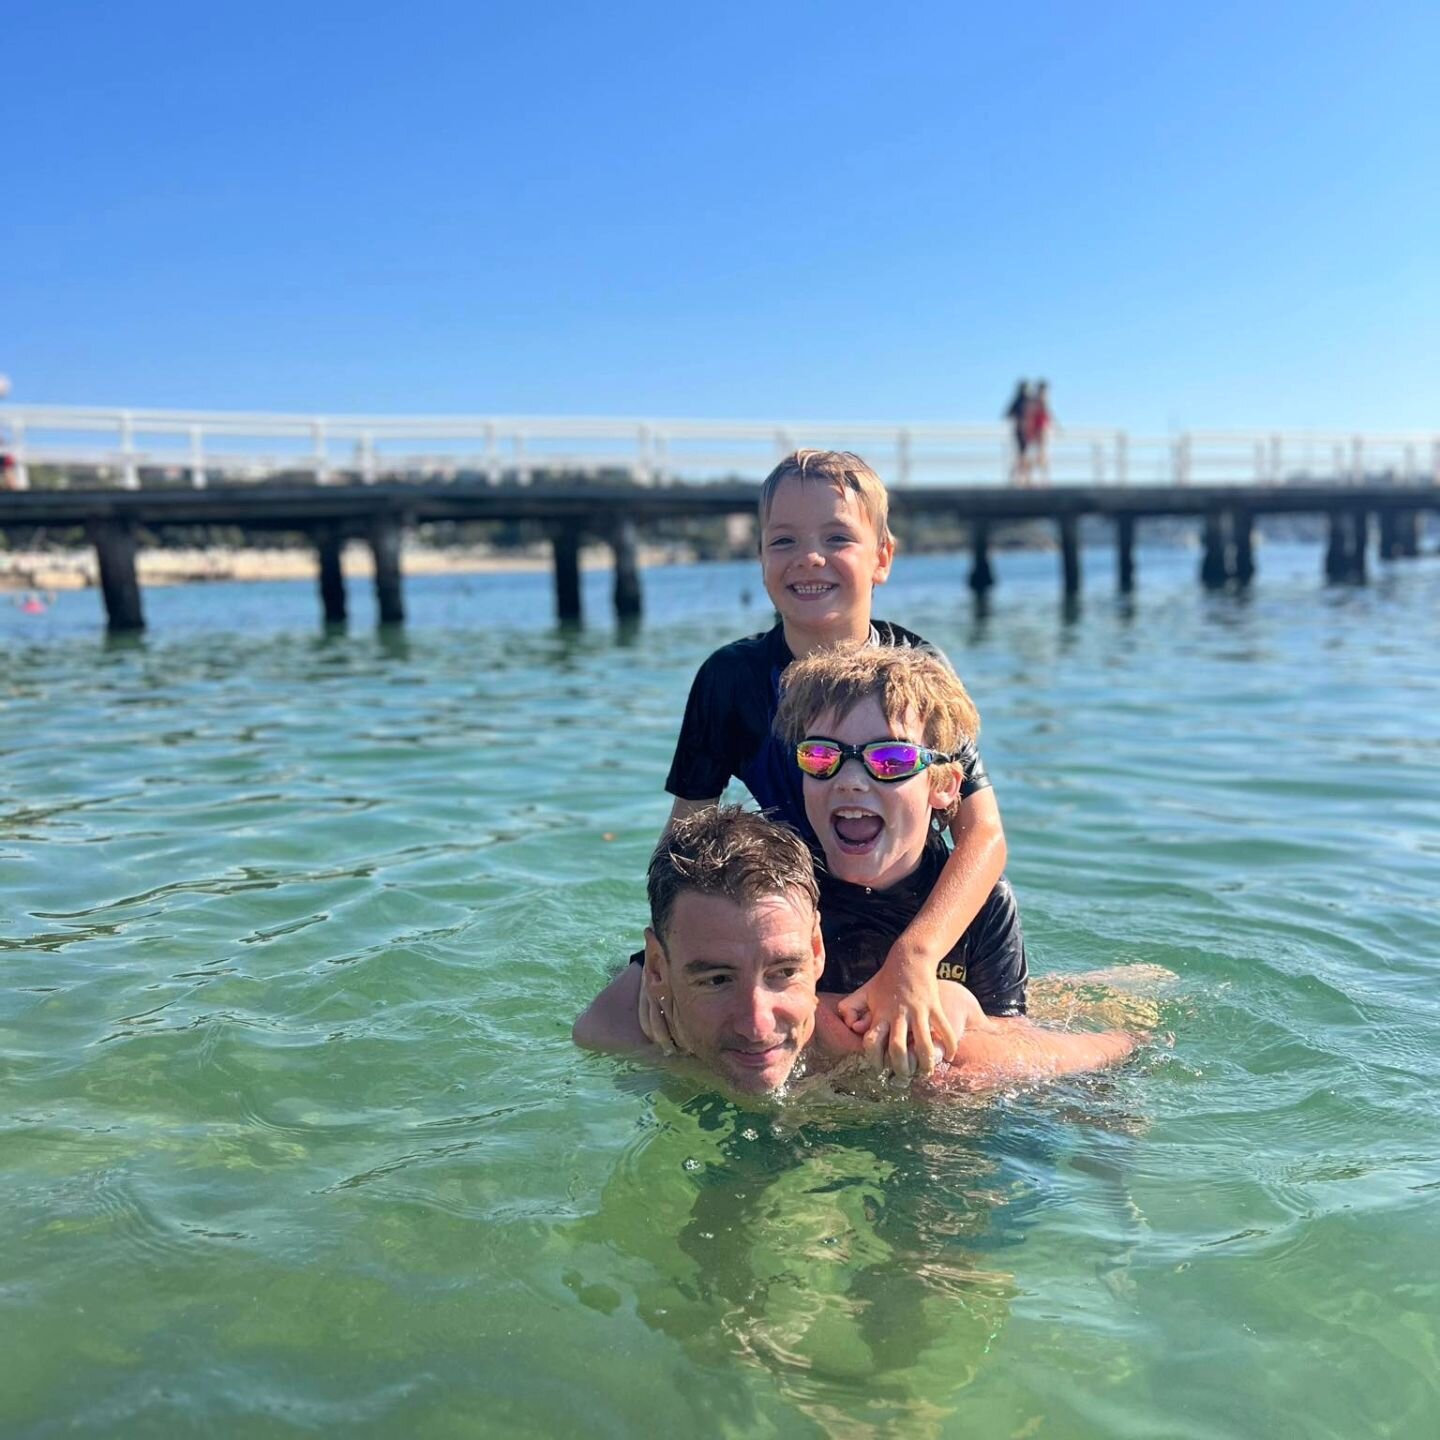 MARCH Madness 🏖

A month filled full of highlights and a few things to add some perspective

Beach time ✅️
Family visits ✅️
MRI and Xrays 🦴
Triathlon Club Fun✅️
Trips to the gym ✅️
New Bike ✅️✅️✅️
New Shoes ✅️✅️✅️
Remembering family and friends🙏

